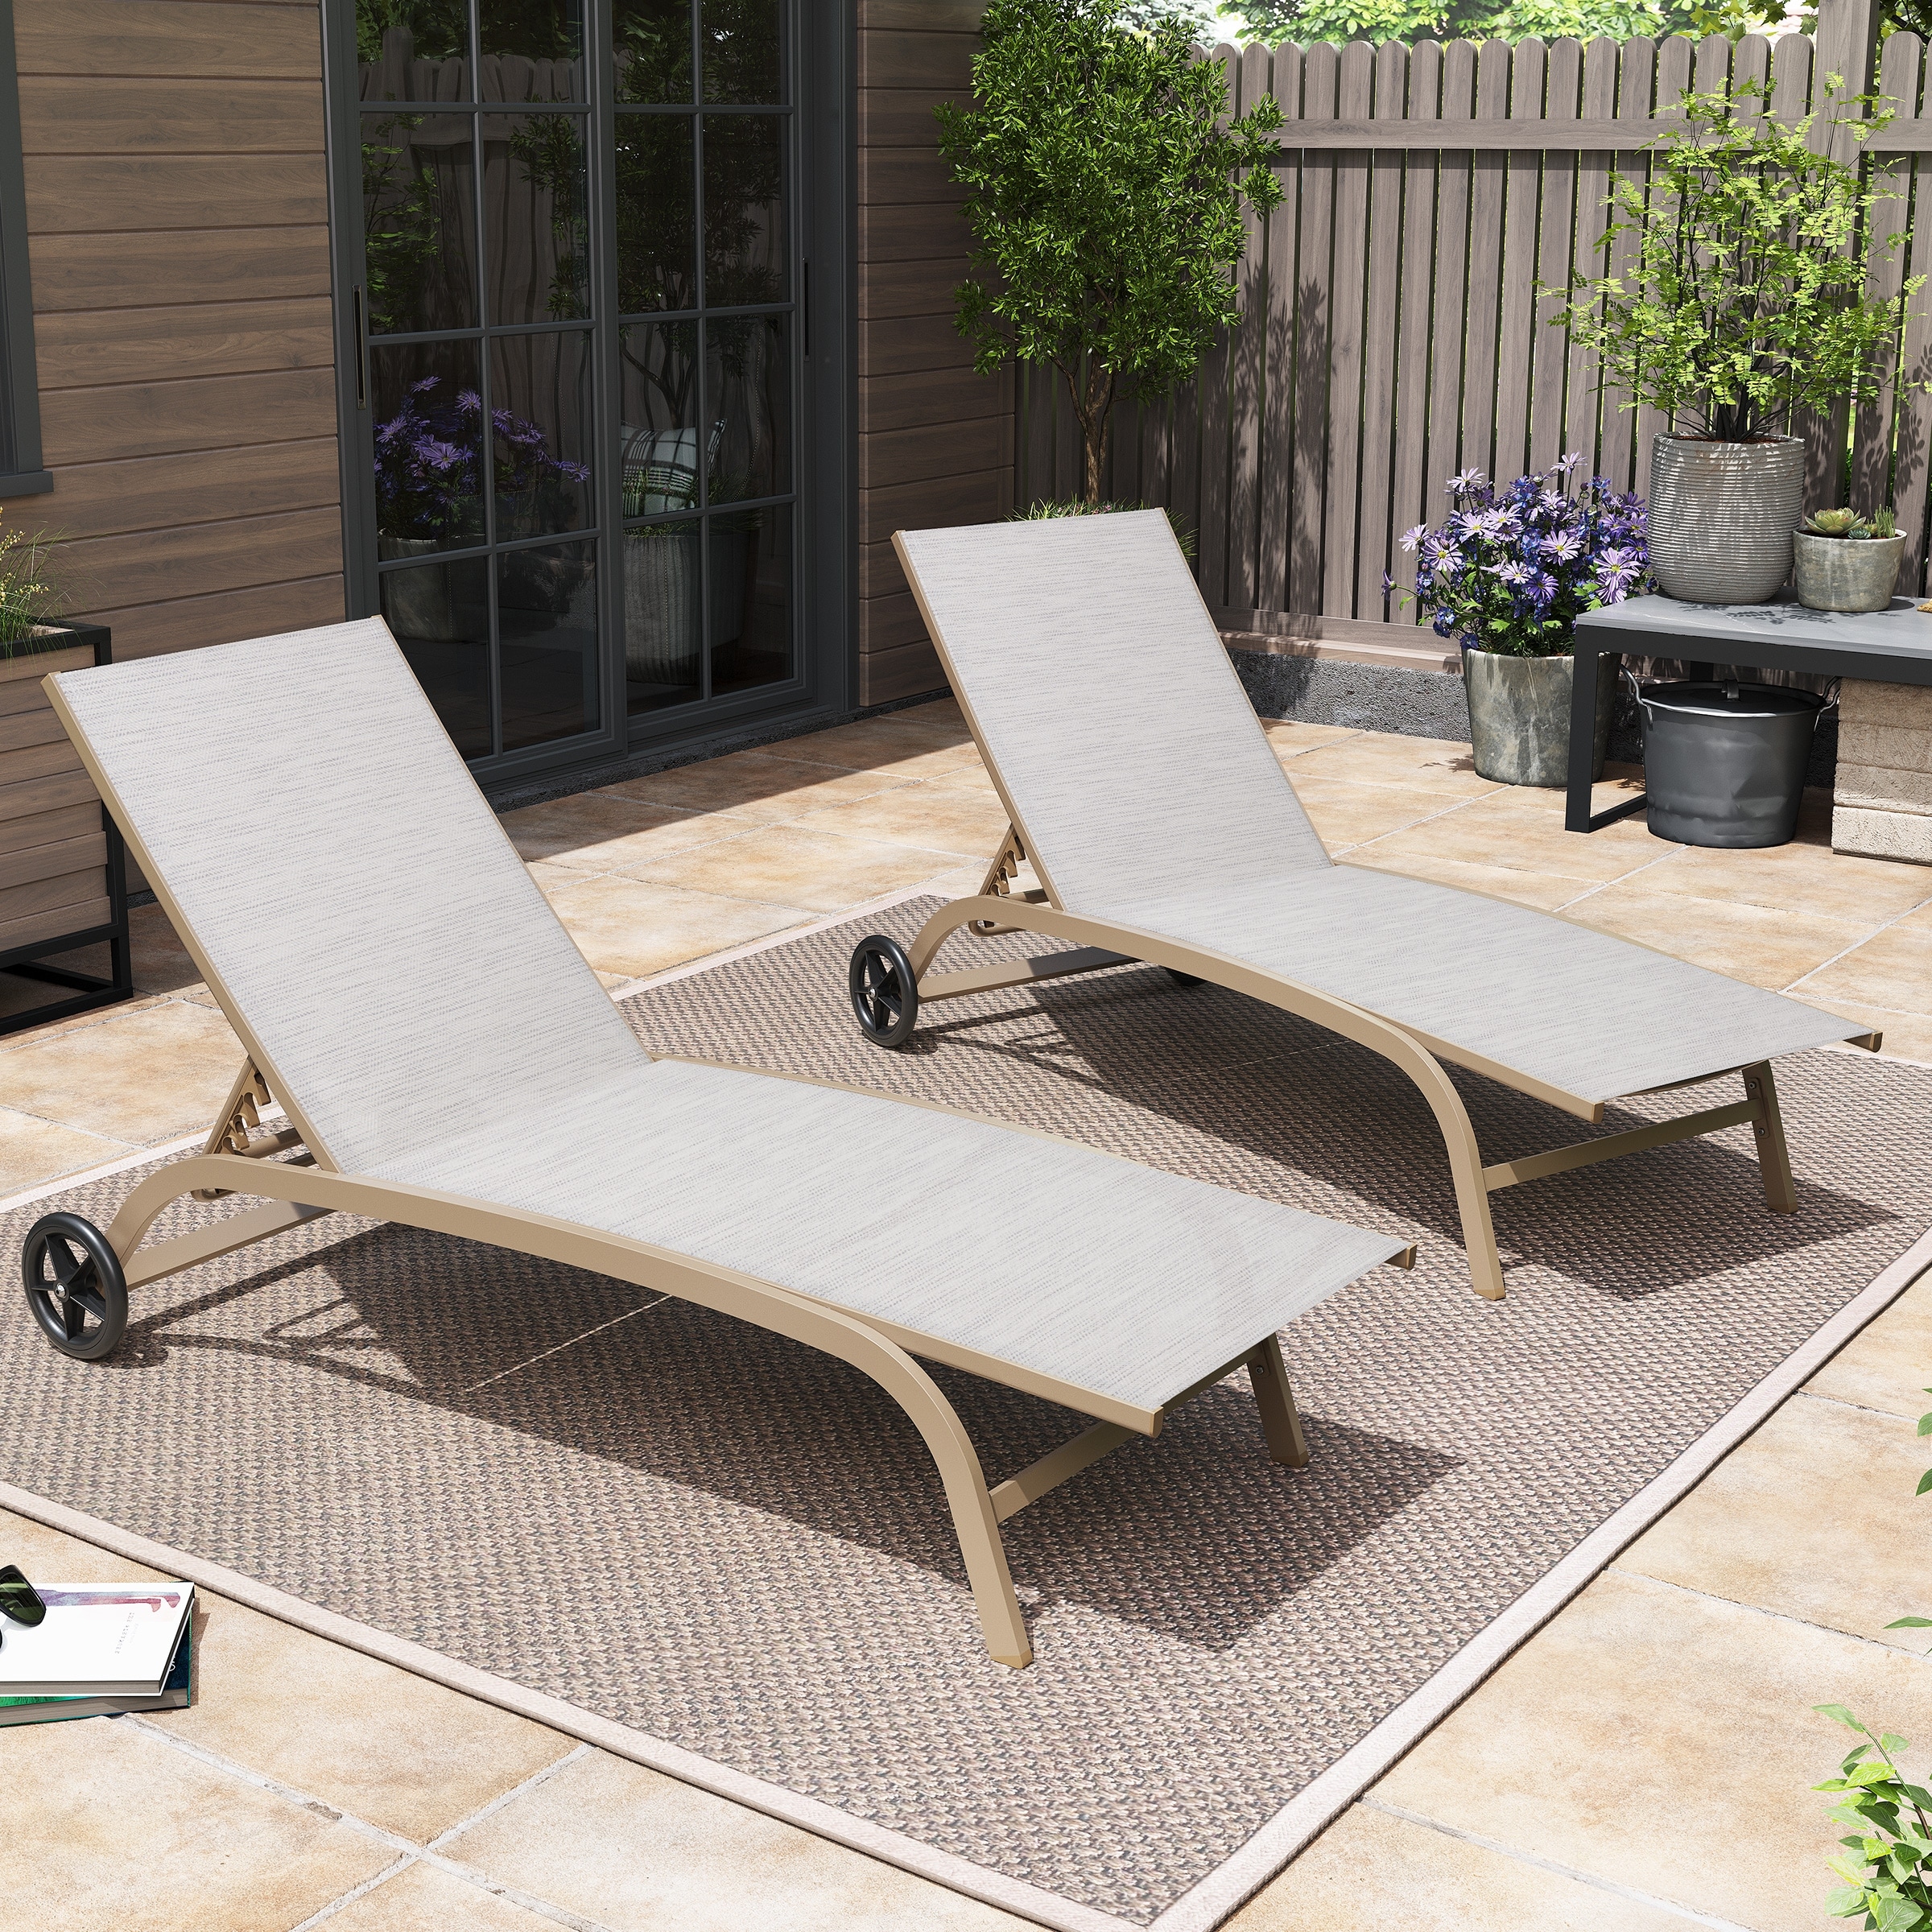 Pellebant 2pcs Full Flat Outdoor Chaise Lounge Chair With Wheels - N/a